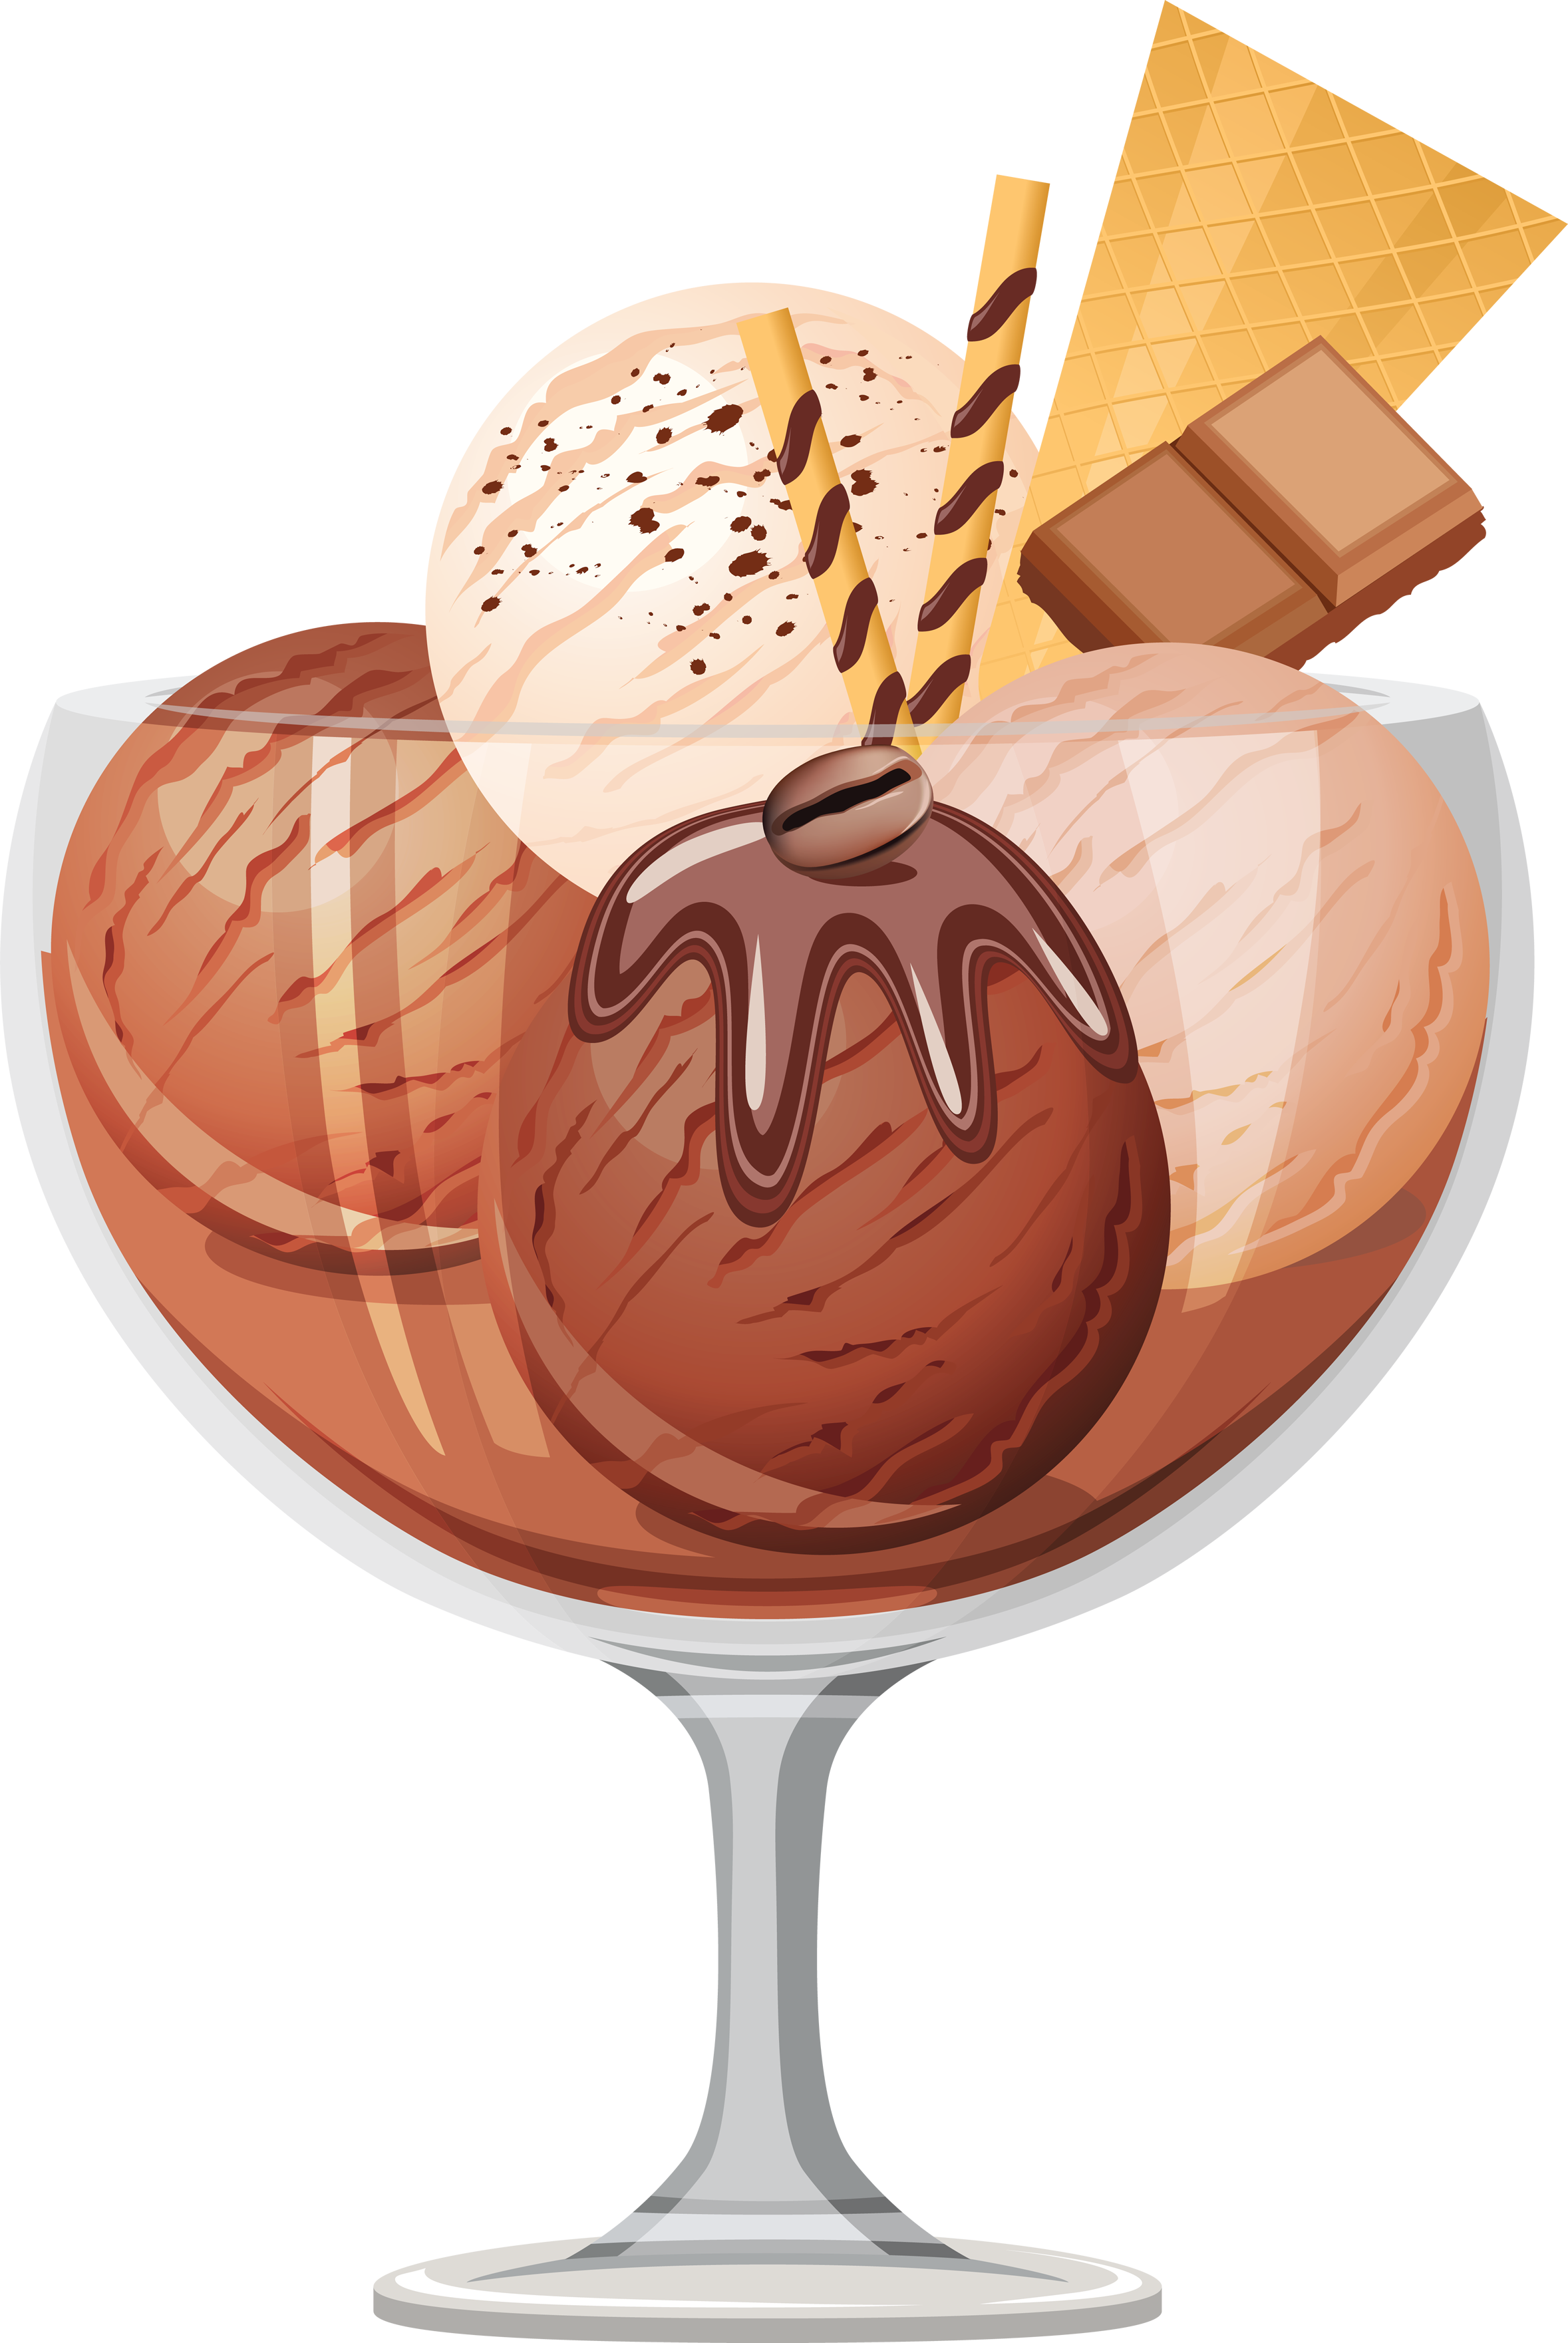 Chocolate Ice Cream Png Transparent Background Free Download 9376 Freeiconspng